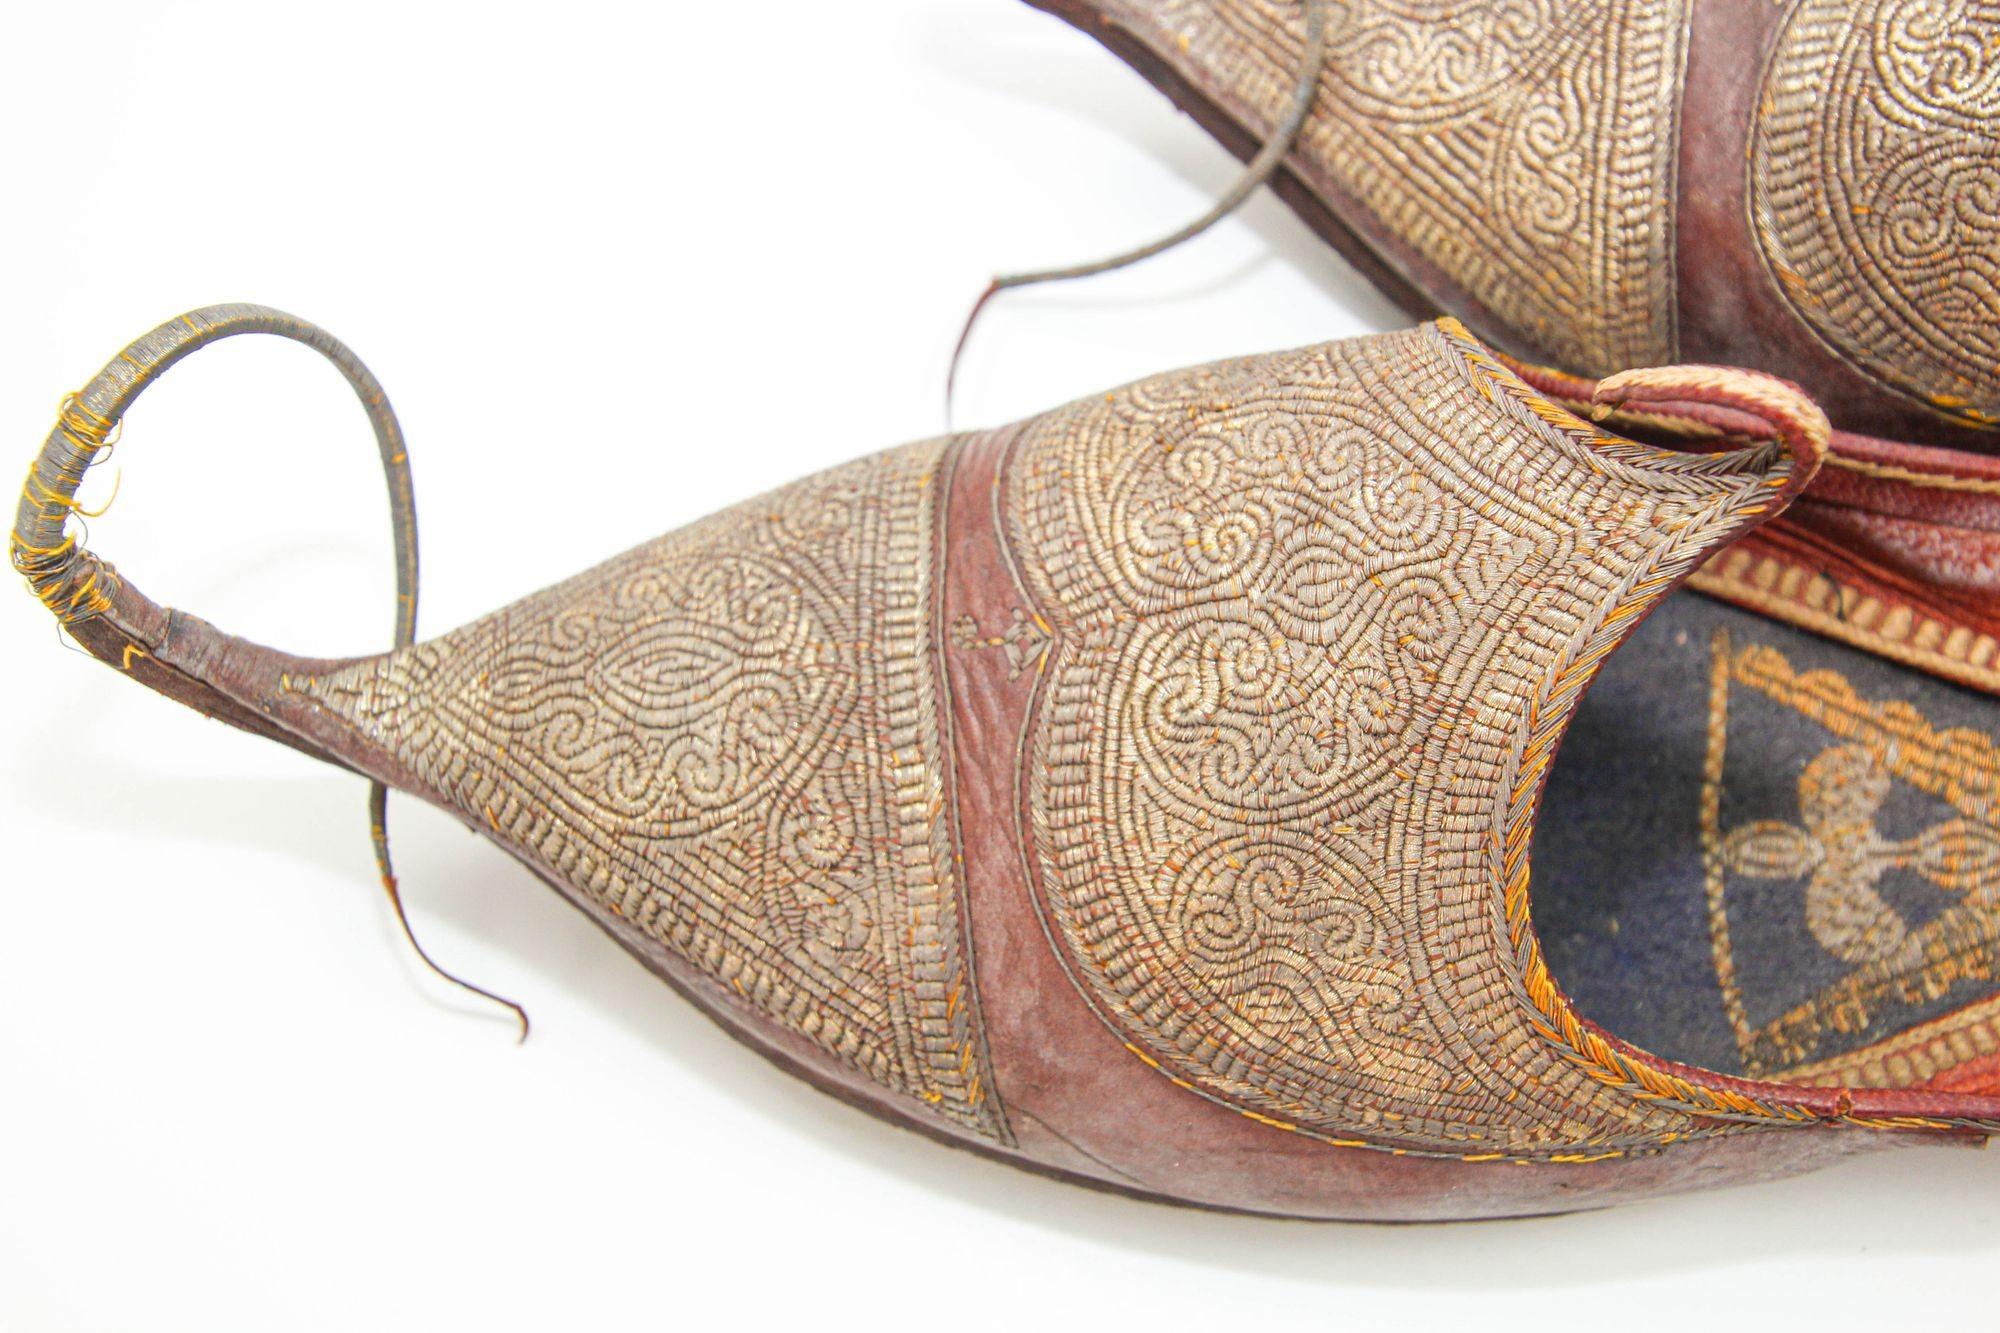 Antique Leather Mughal Raj Ottoman Moorish Shoes Gold Embroidered In Good Condition For Sale In North Hollywood, CA